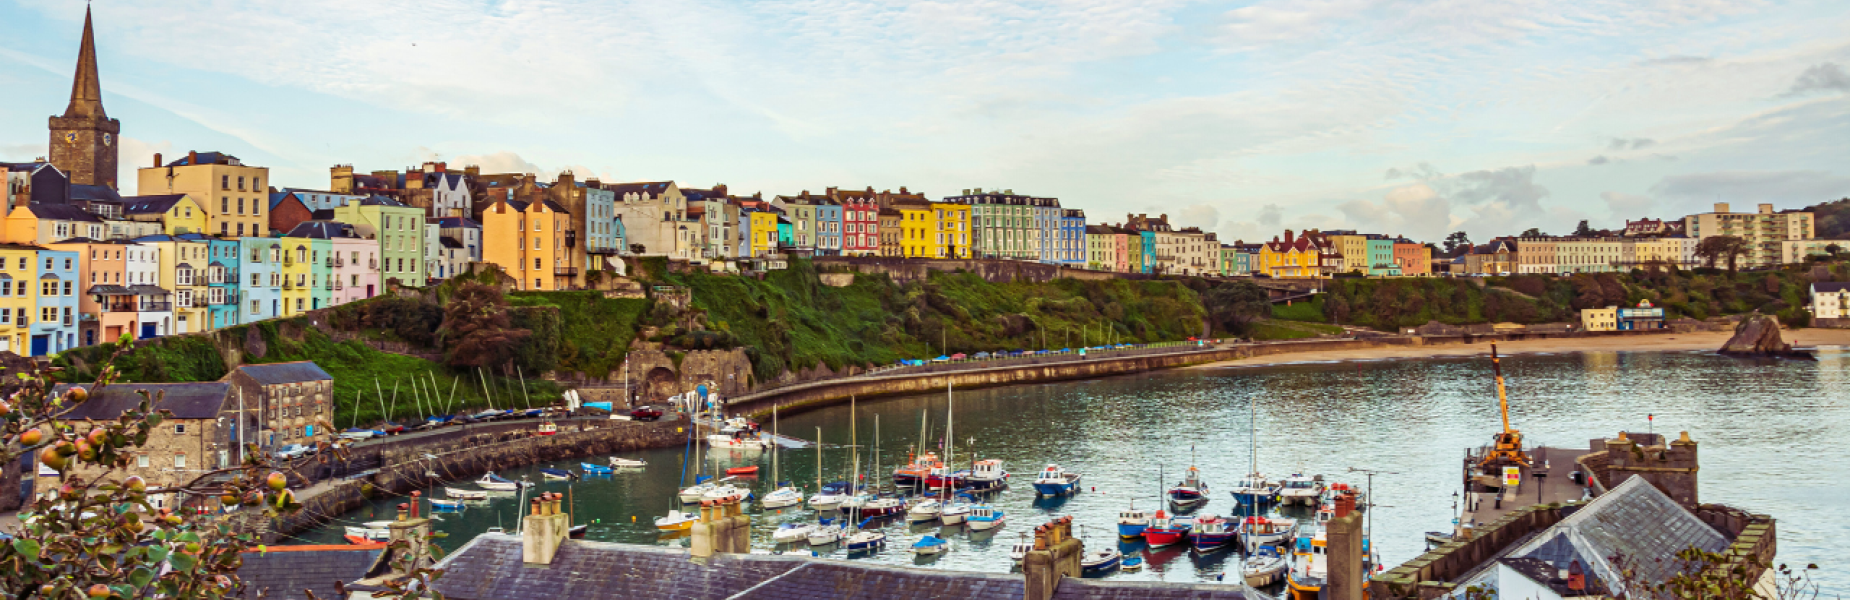 Image of the Harbour in Tenby